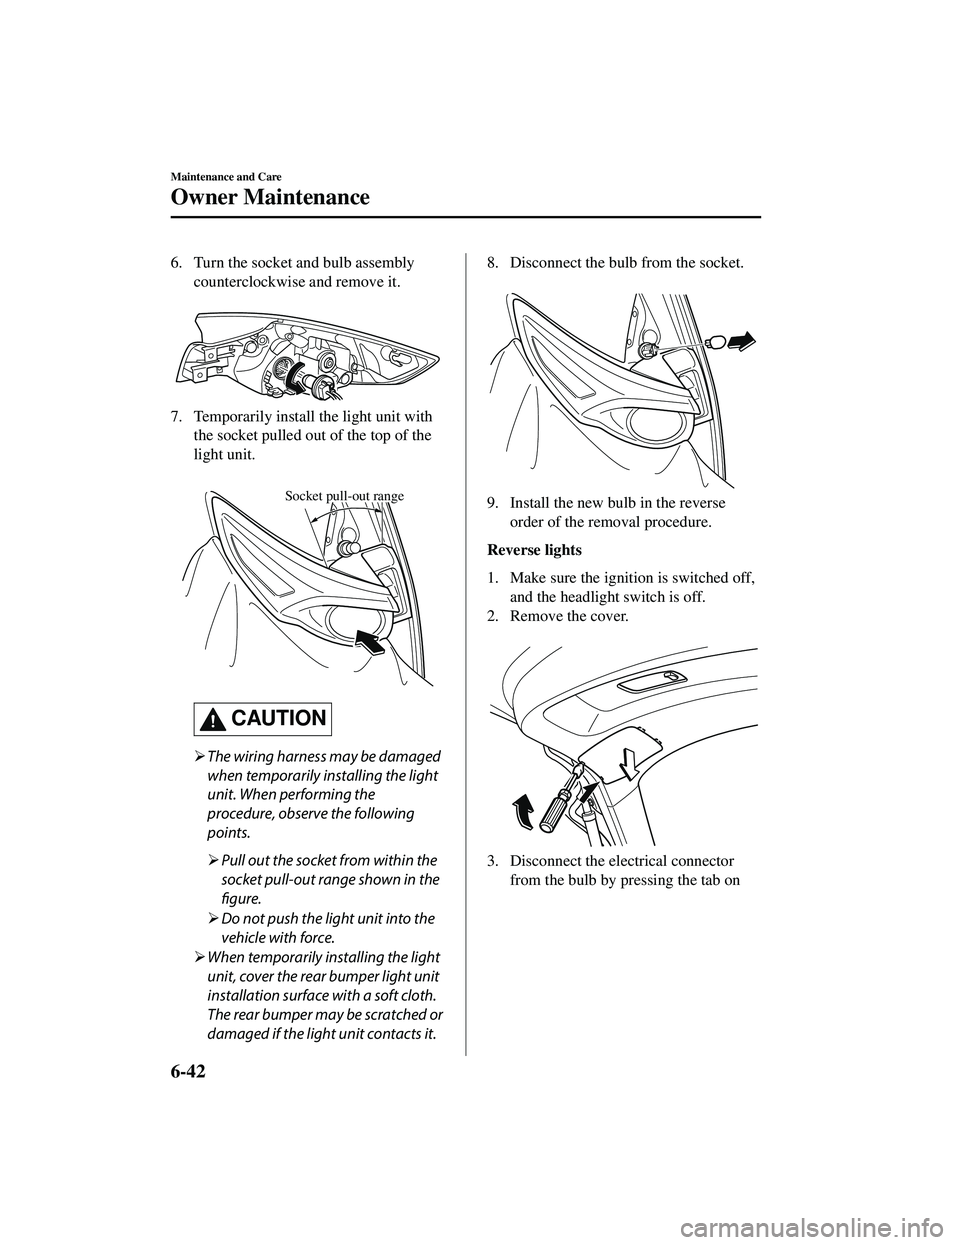 MAZDA MODEL CX-9 2021  Owners Manual 6. Turn the socket and bulb assemblycounterclockwise and remove it.
 
7. Temporarily install the light unit withthe socket pulled out  of the top of the
light unit.
 
Socket pull-out range
CAUTION
